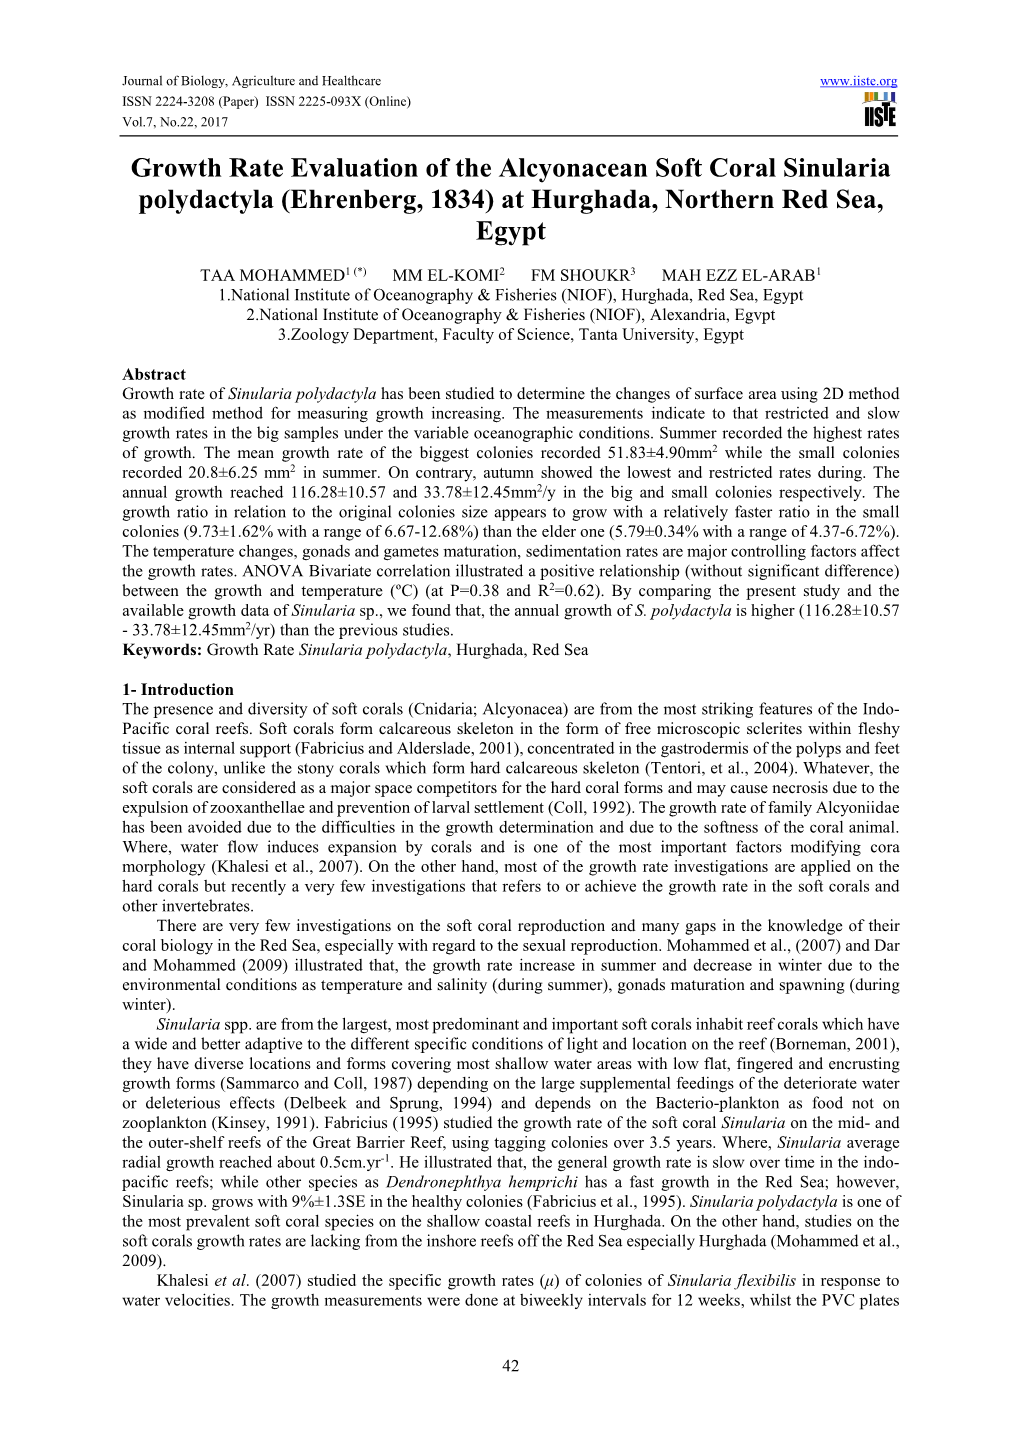 Growth Rate Evaluation of the Alcyonacean Soft Coral Sinularia Polydactyla (Ehrenberg, 1834) at Hurghada, Northern Red Sea, Egypt